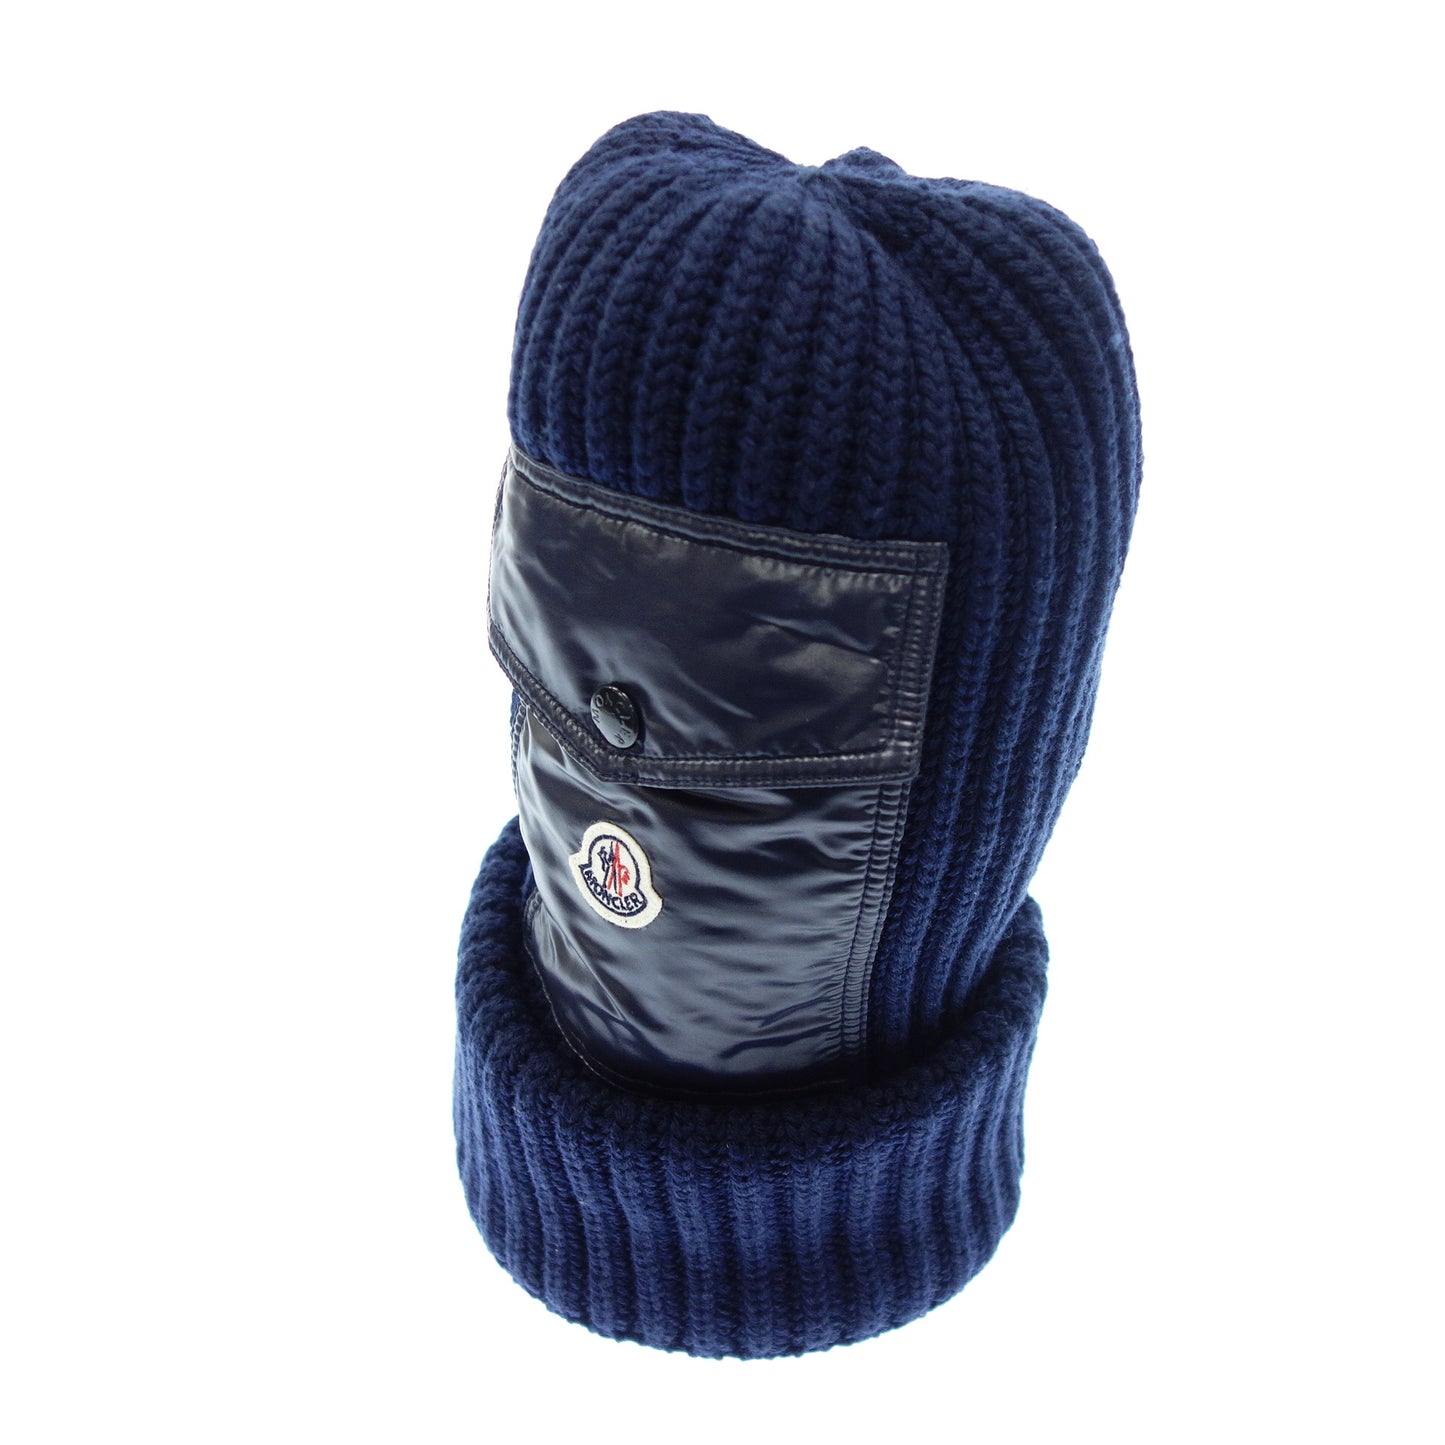 Moncler knit cap BERRETTO TRICOT with pocket navy MONCLER [AFI22] [Used] 